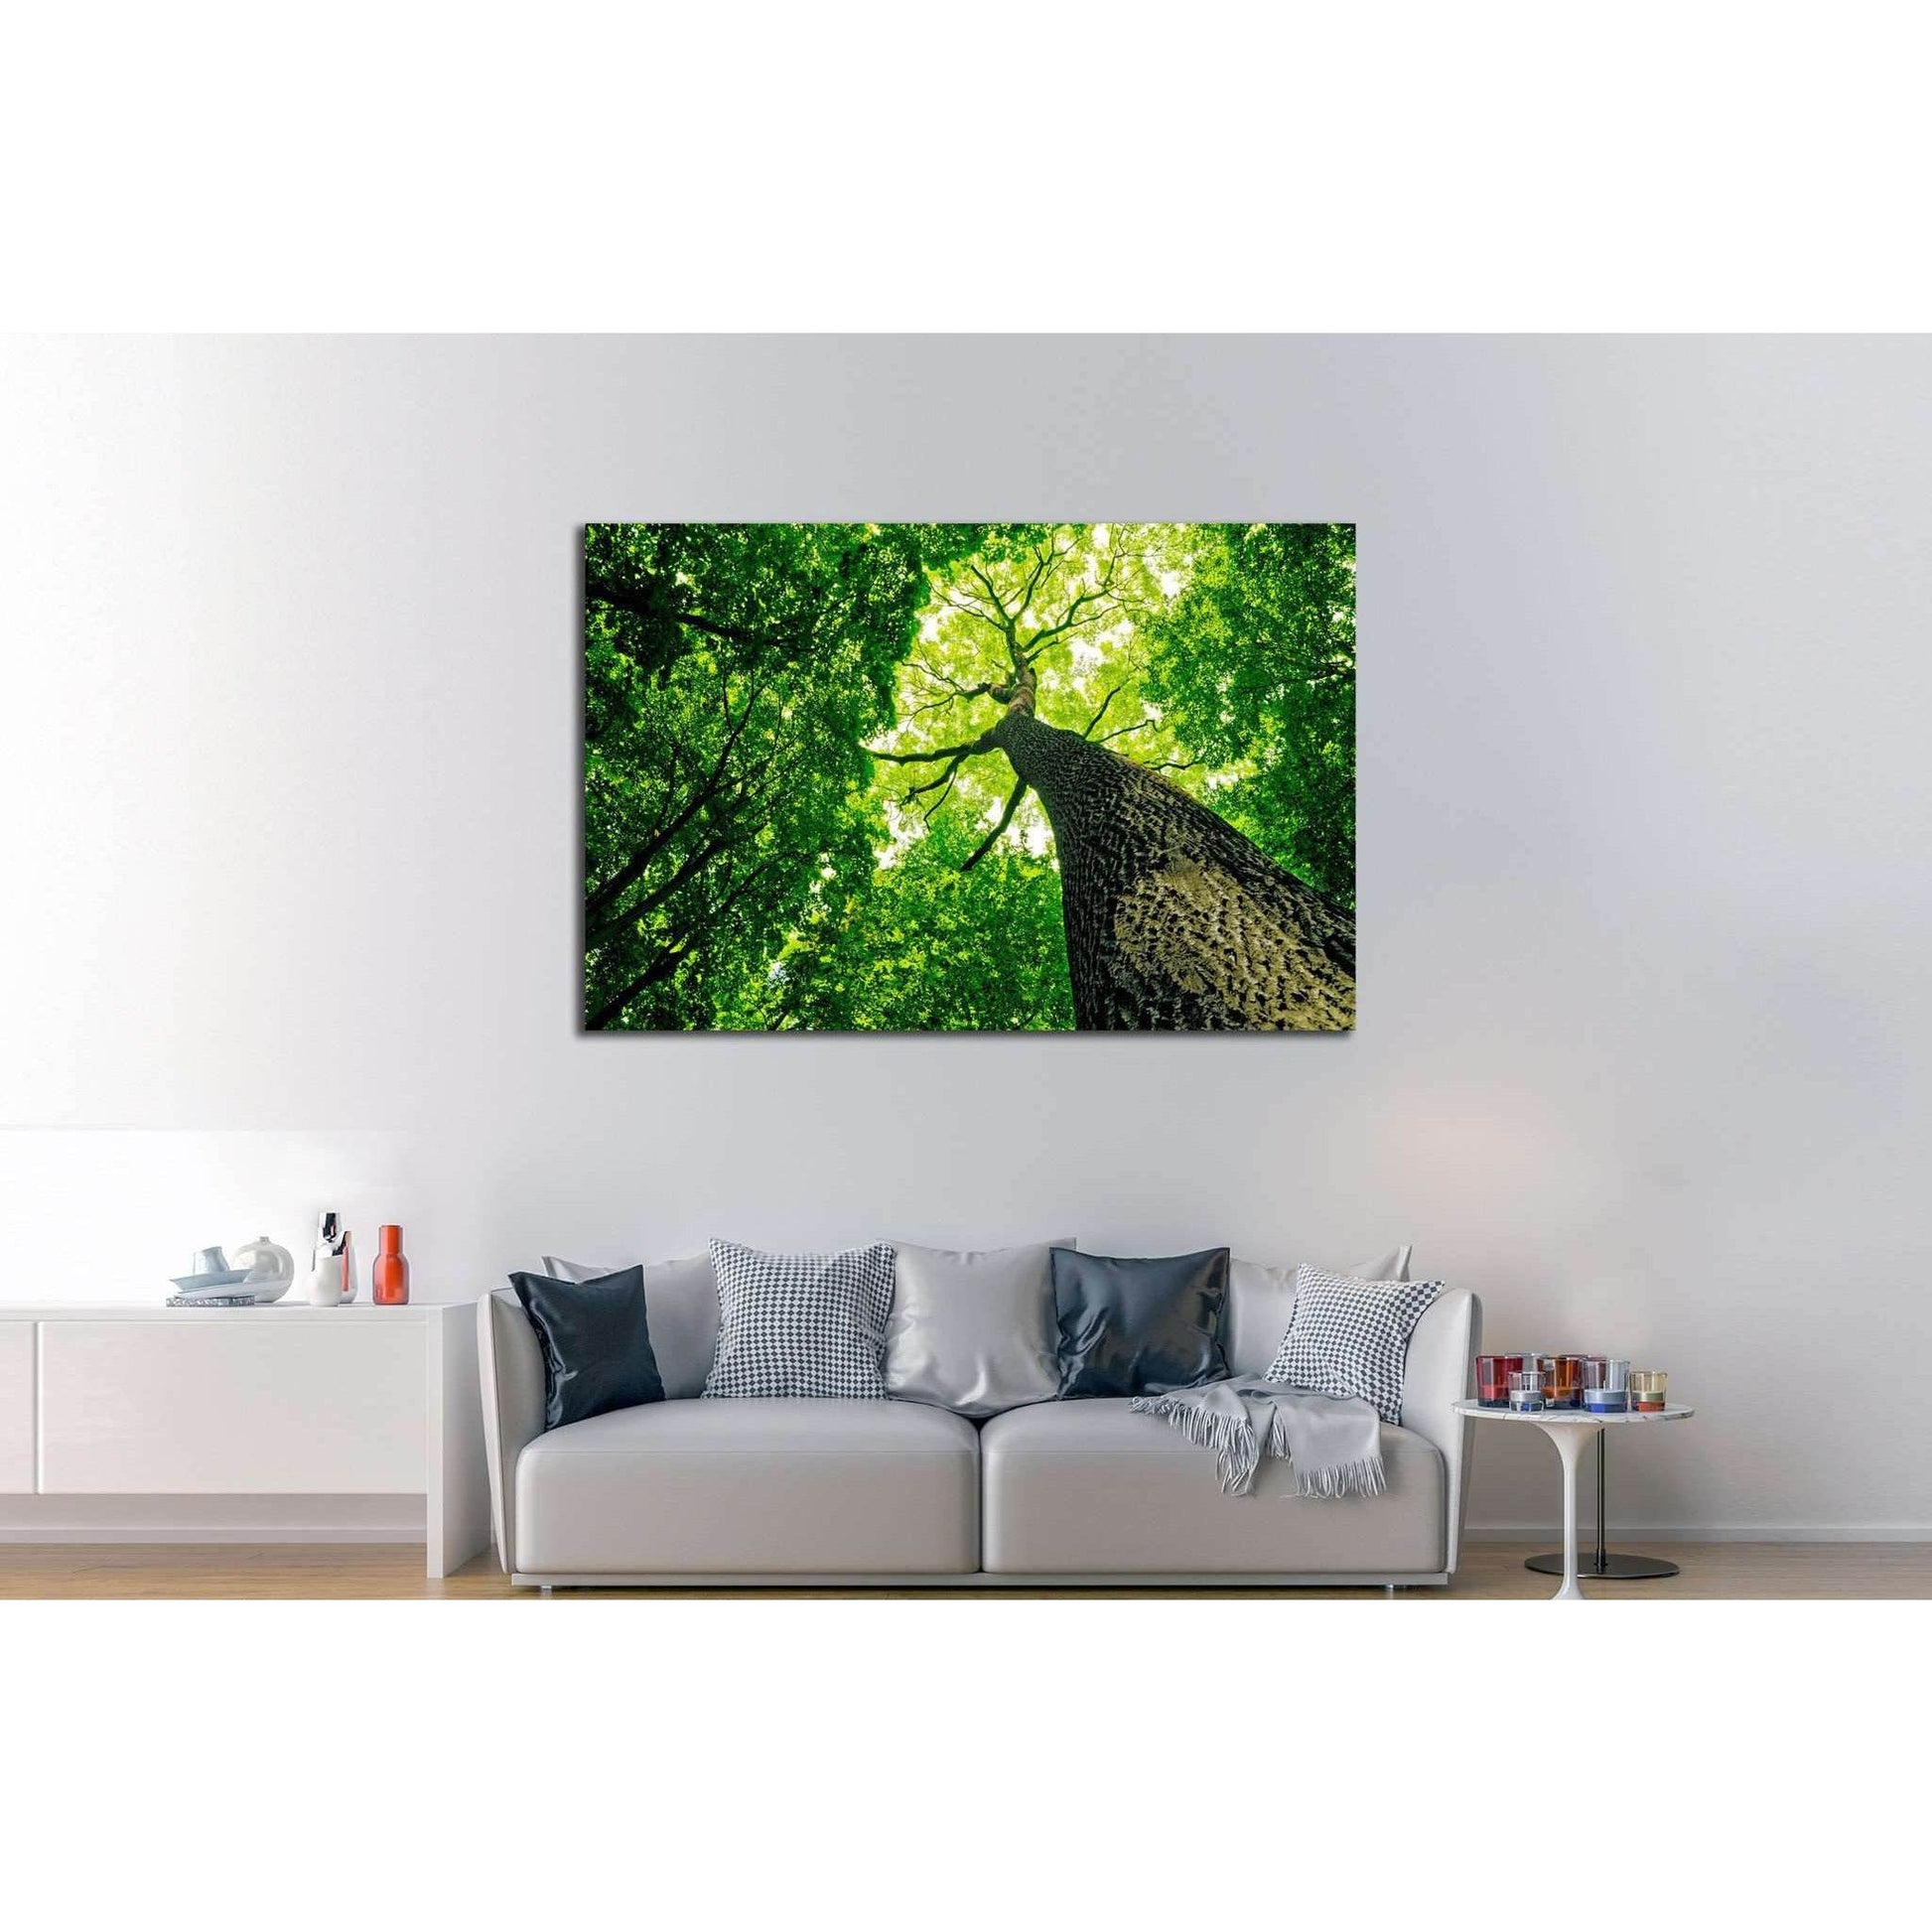 Upward Forest View Wall Art for Eco-Friendly InteriorsThis canvas print features an upward view of a towering tree, its trunk leading to a canopy of vibrant green leaves against the sky. This perspective celebrates the grandeur and vitality of nature, mak